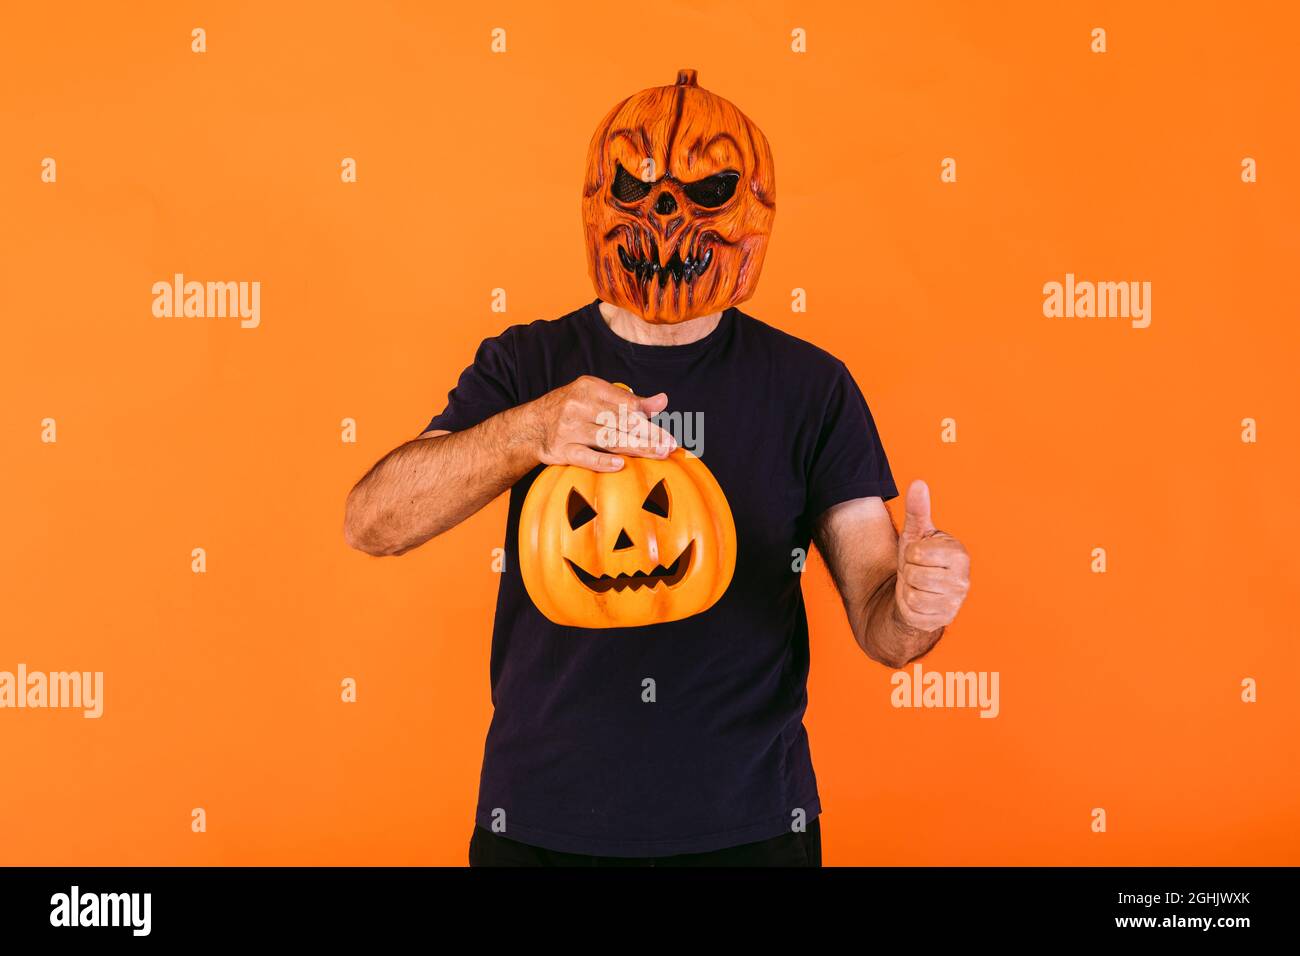 Man wearing scary pumpkin latex mask with blue t-shirt, holds a 'Jack-o-lantern' pumpkin and thumbs up, on orange background. Halloween and days of th Stock Photo